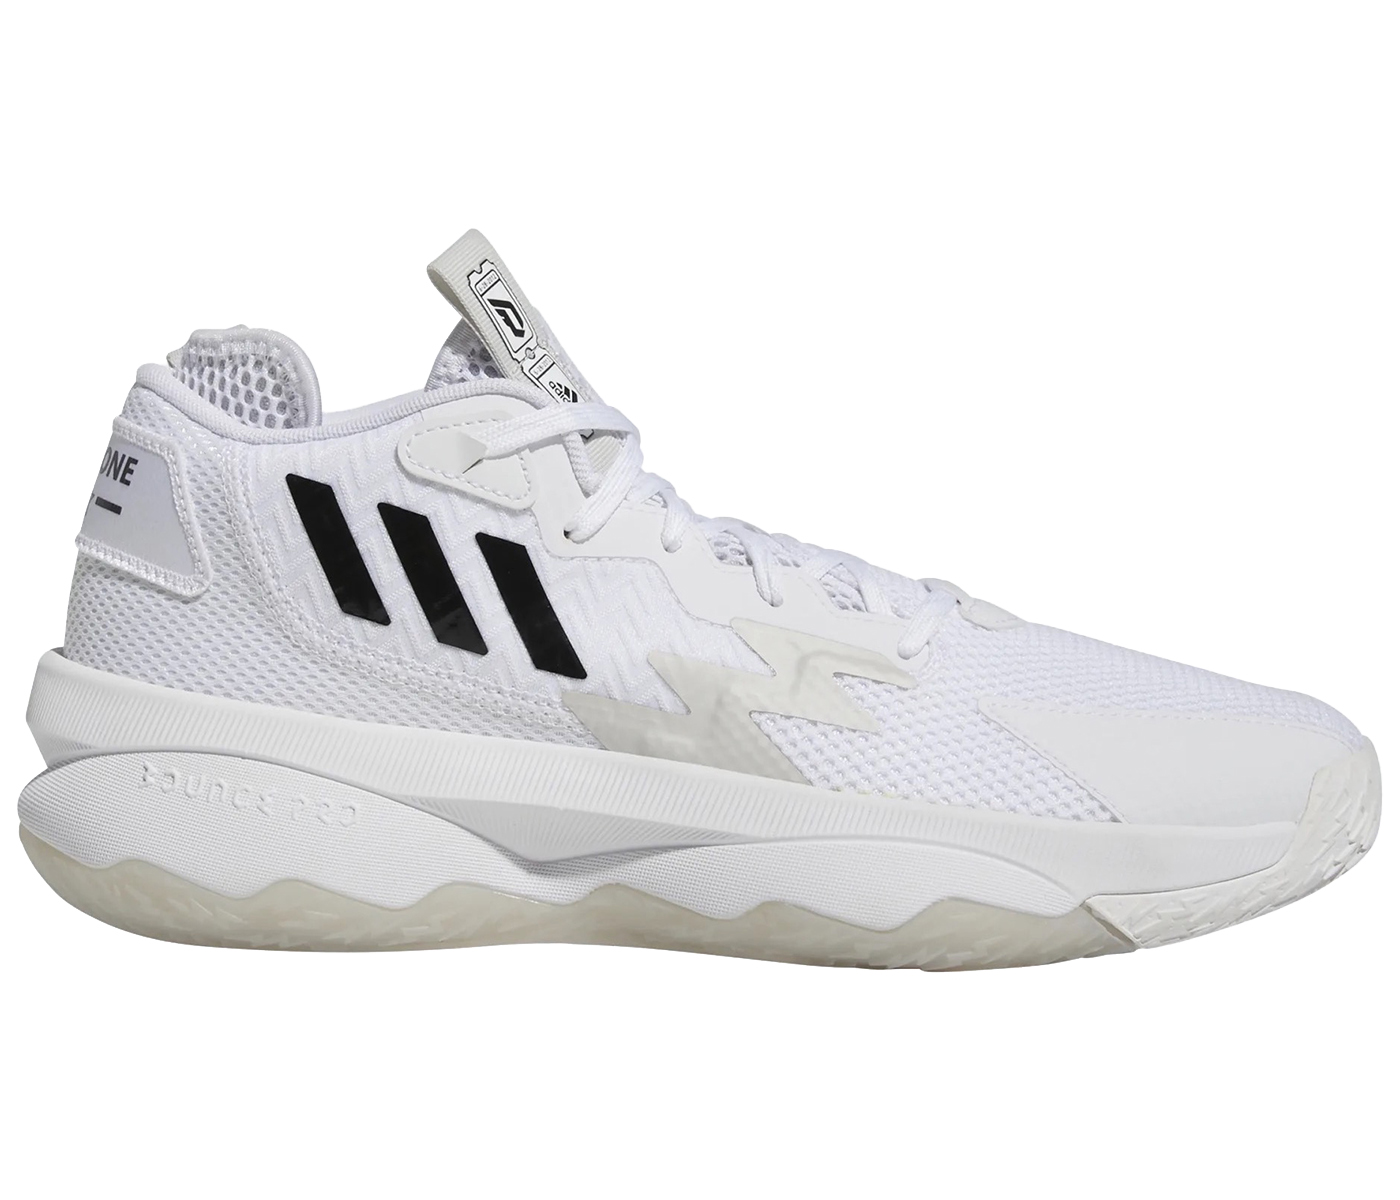 adidas Dame 8 Admit One Cloud White Men's - GY6462 - US